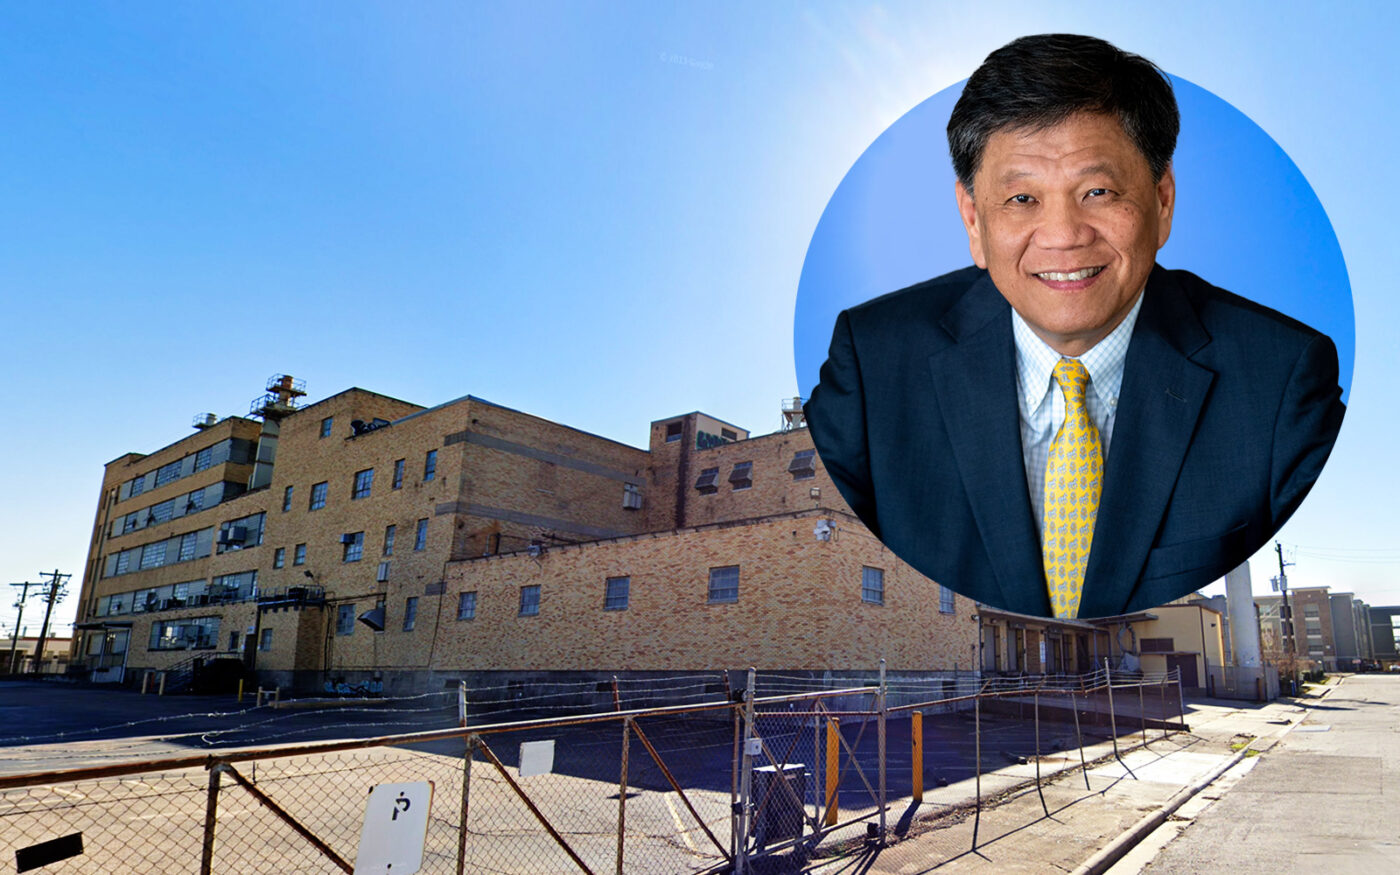 Lovett Commercial founder Frank Liu and the former Farmer Bros. coffee plant at 235 N Norwood Street in Houston